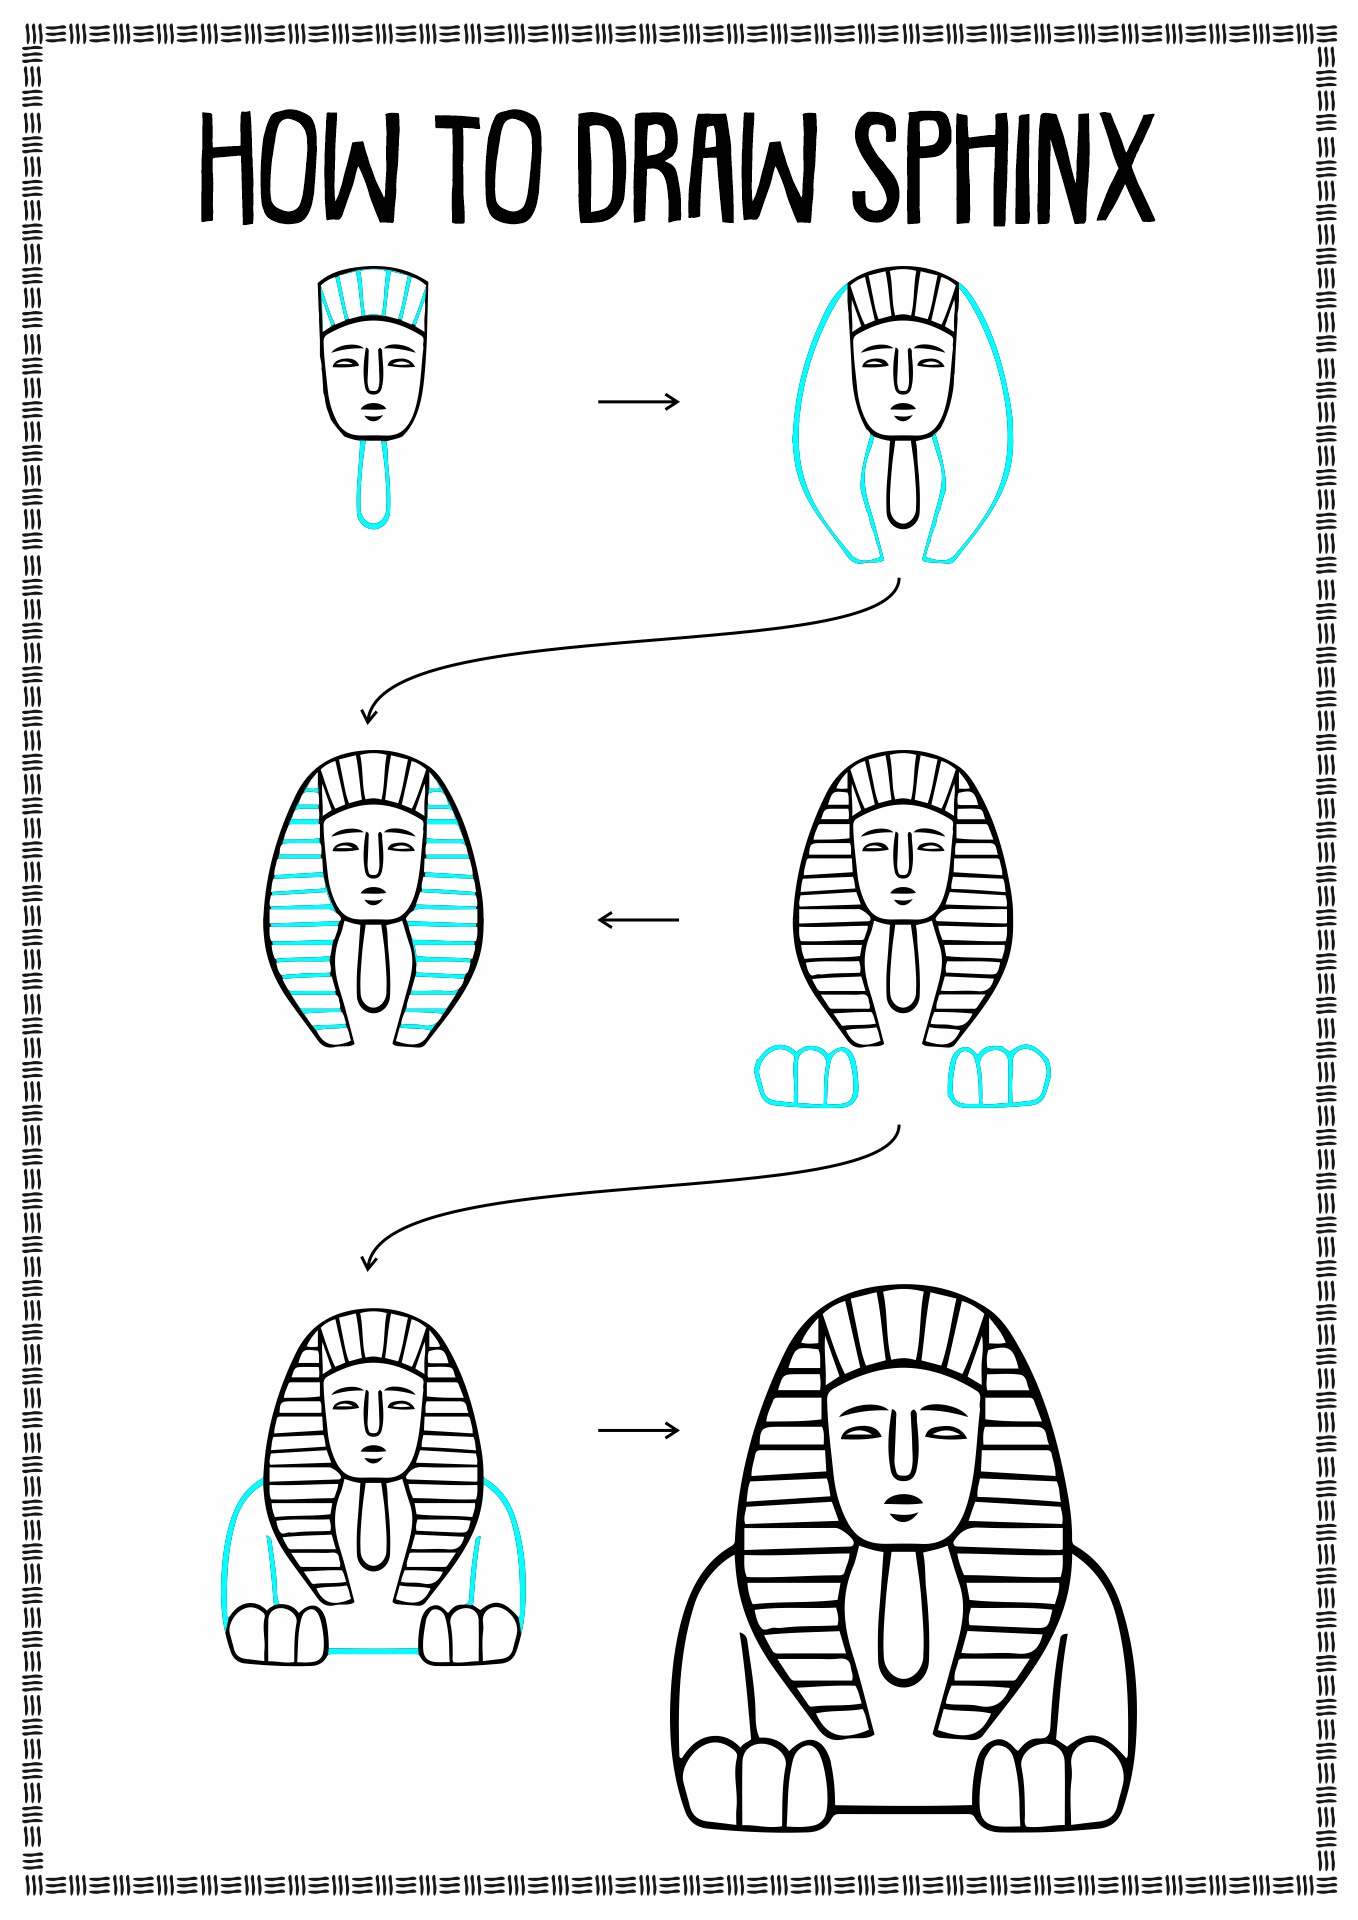 How to Draw Egyptian Sphinx Image